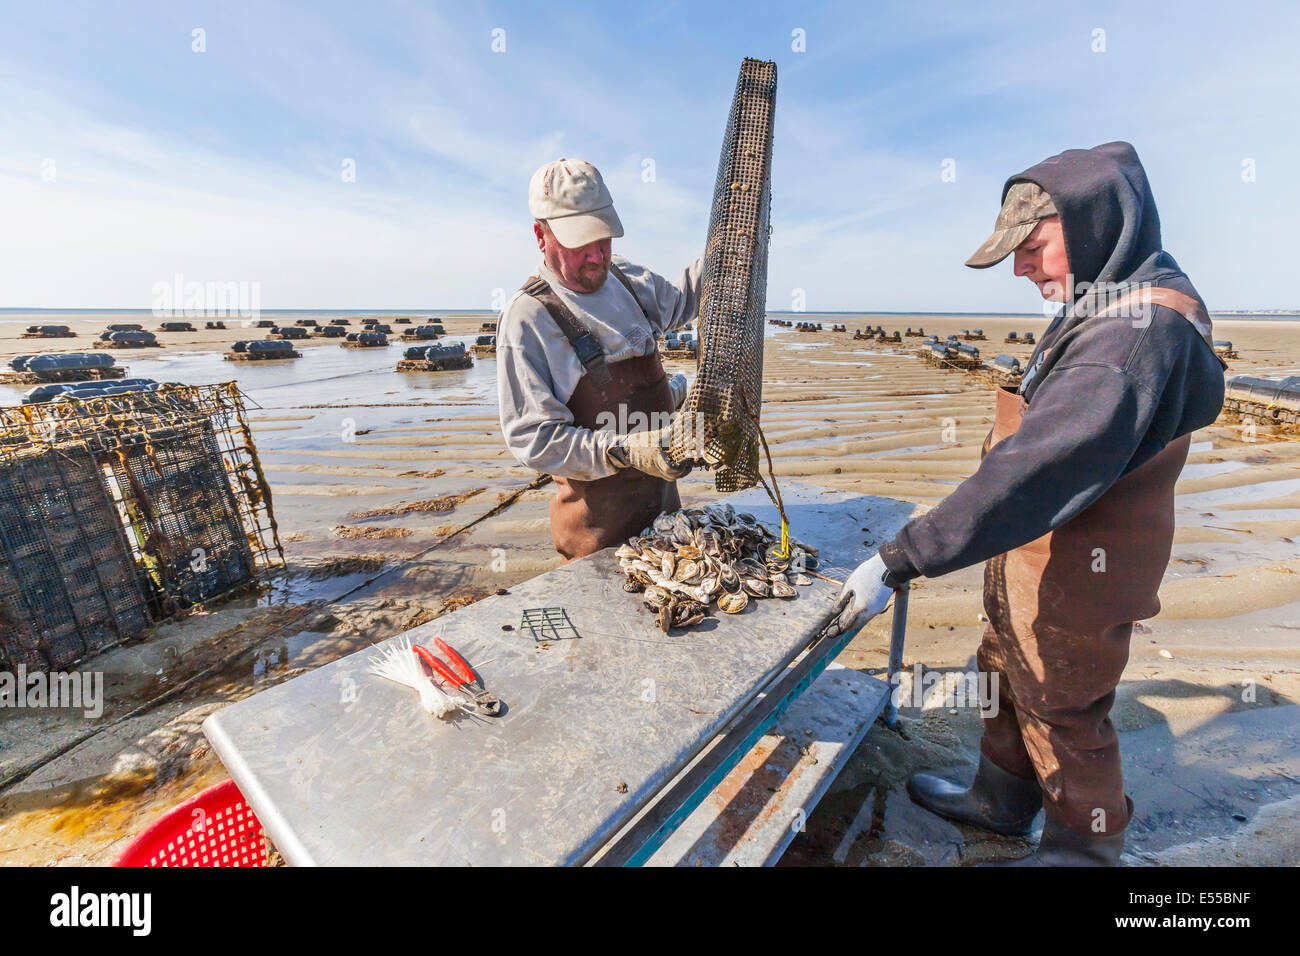 Oyster fishermen working and growing oysters on their oyster farm collect the shell fish from the baskets. Stock Photo